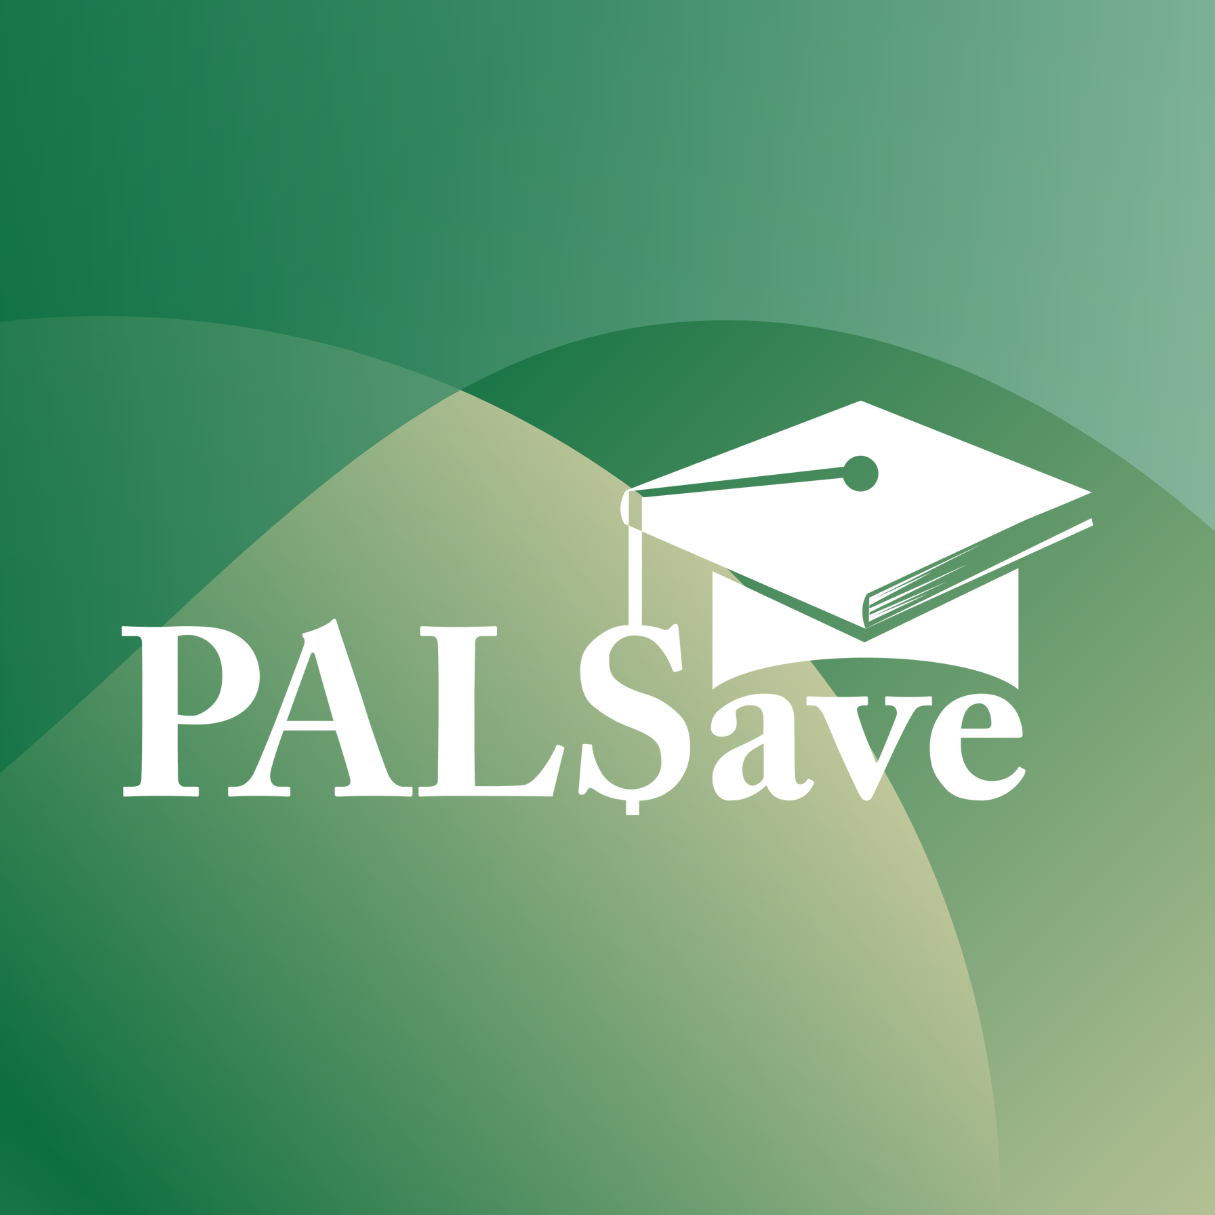 White PALSave logo over a green abstract background